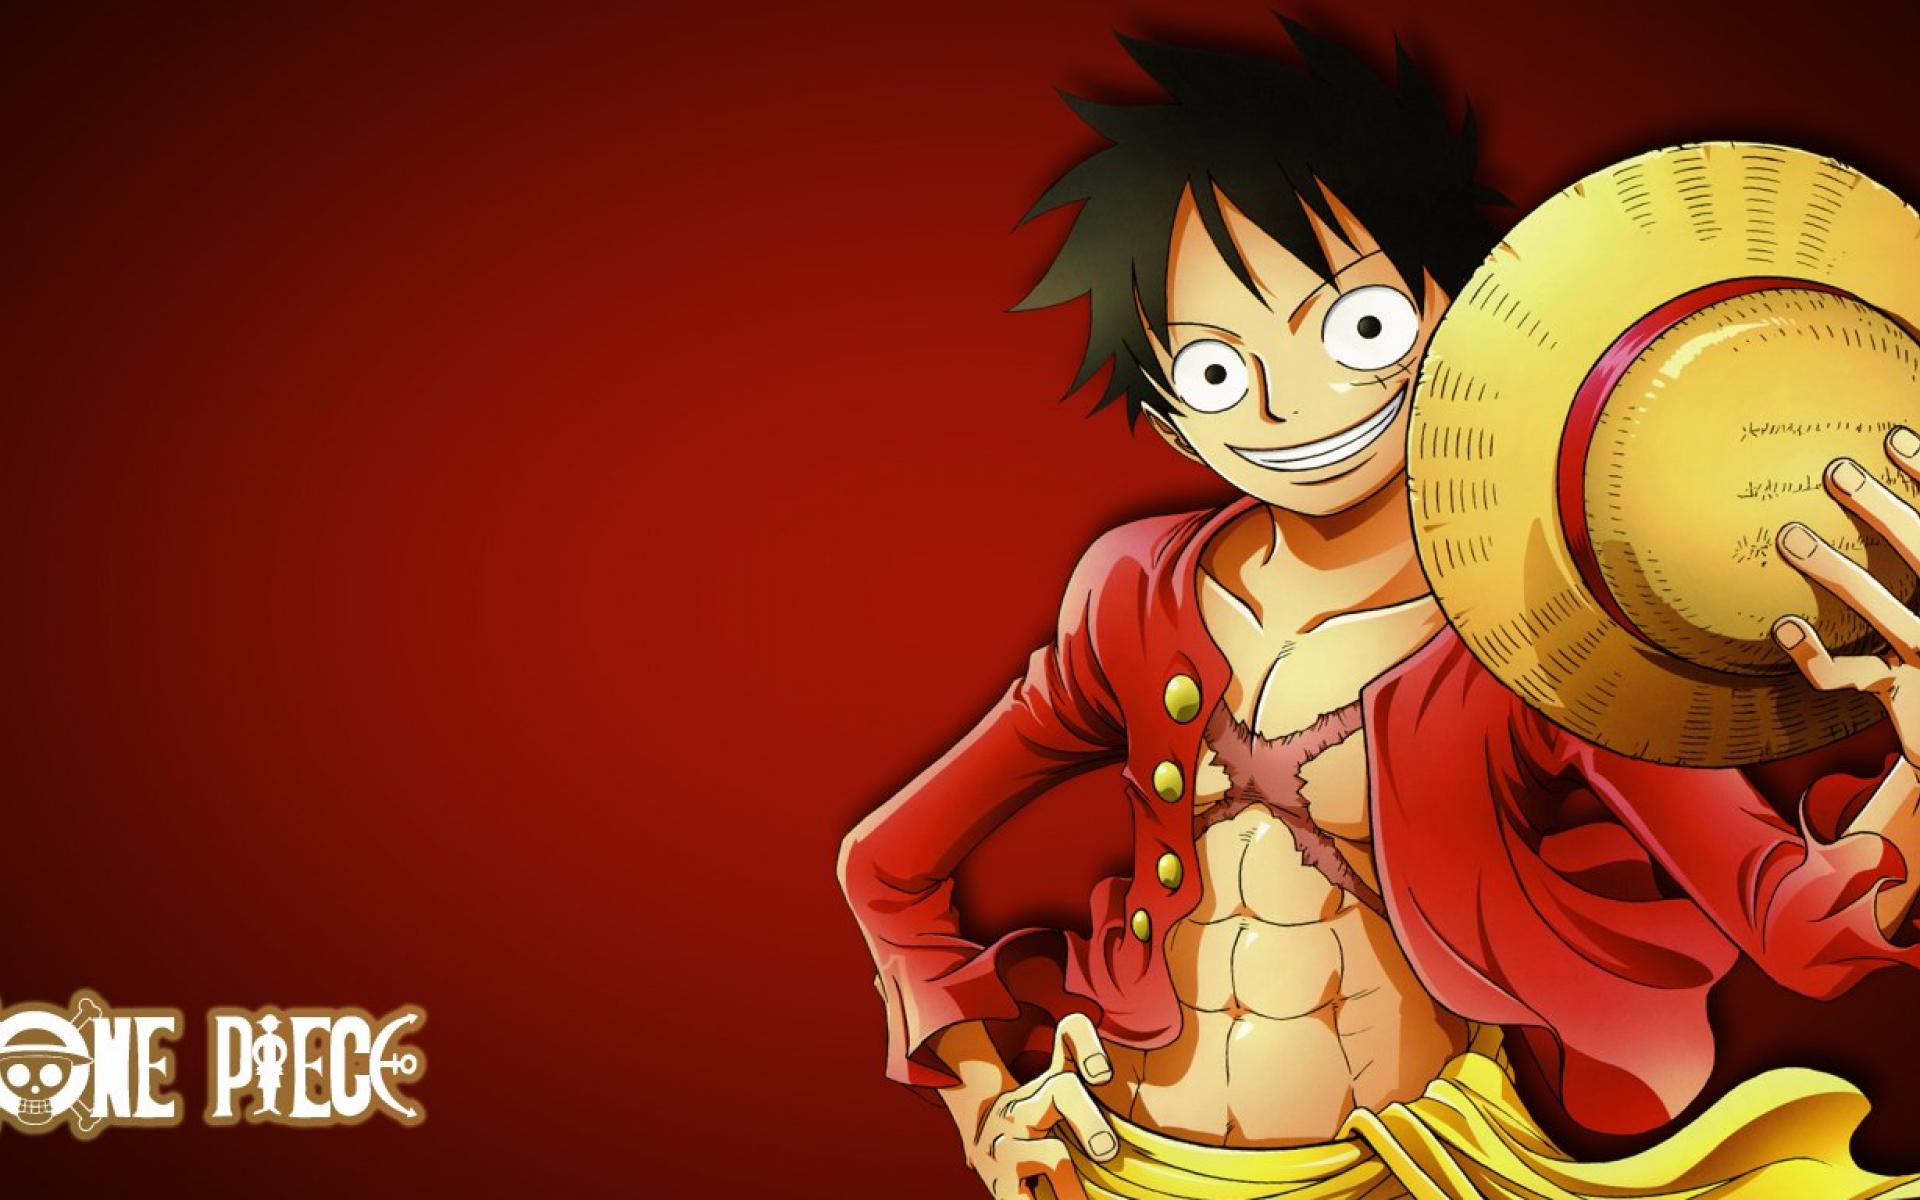 luffy wallpaper 1280 800 wallpapers 1280 800 wallpapers